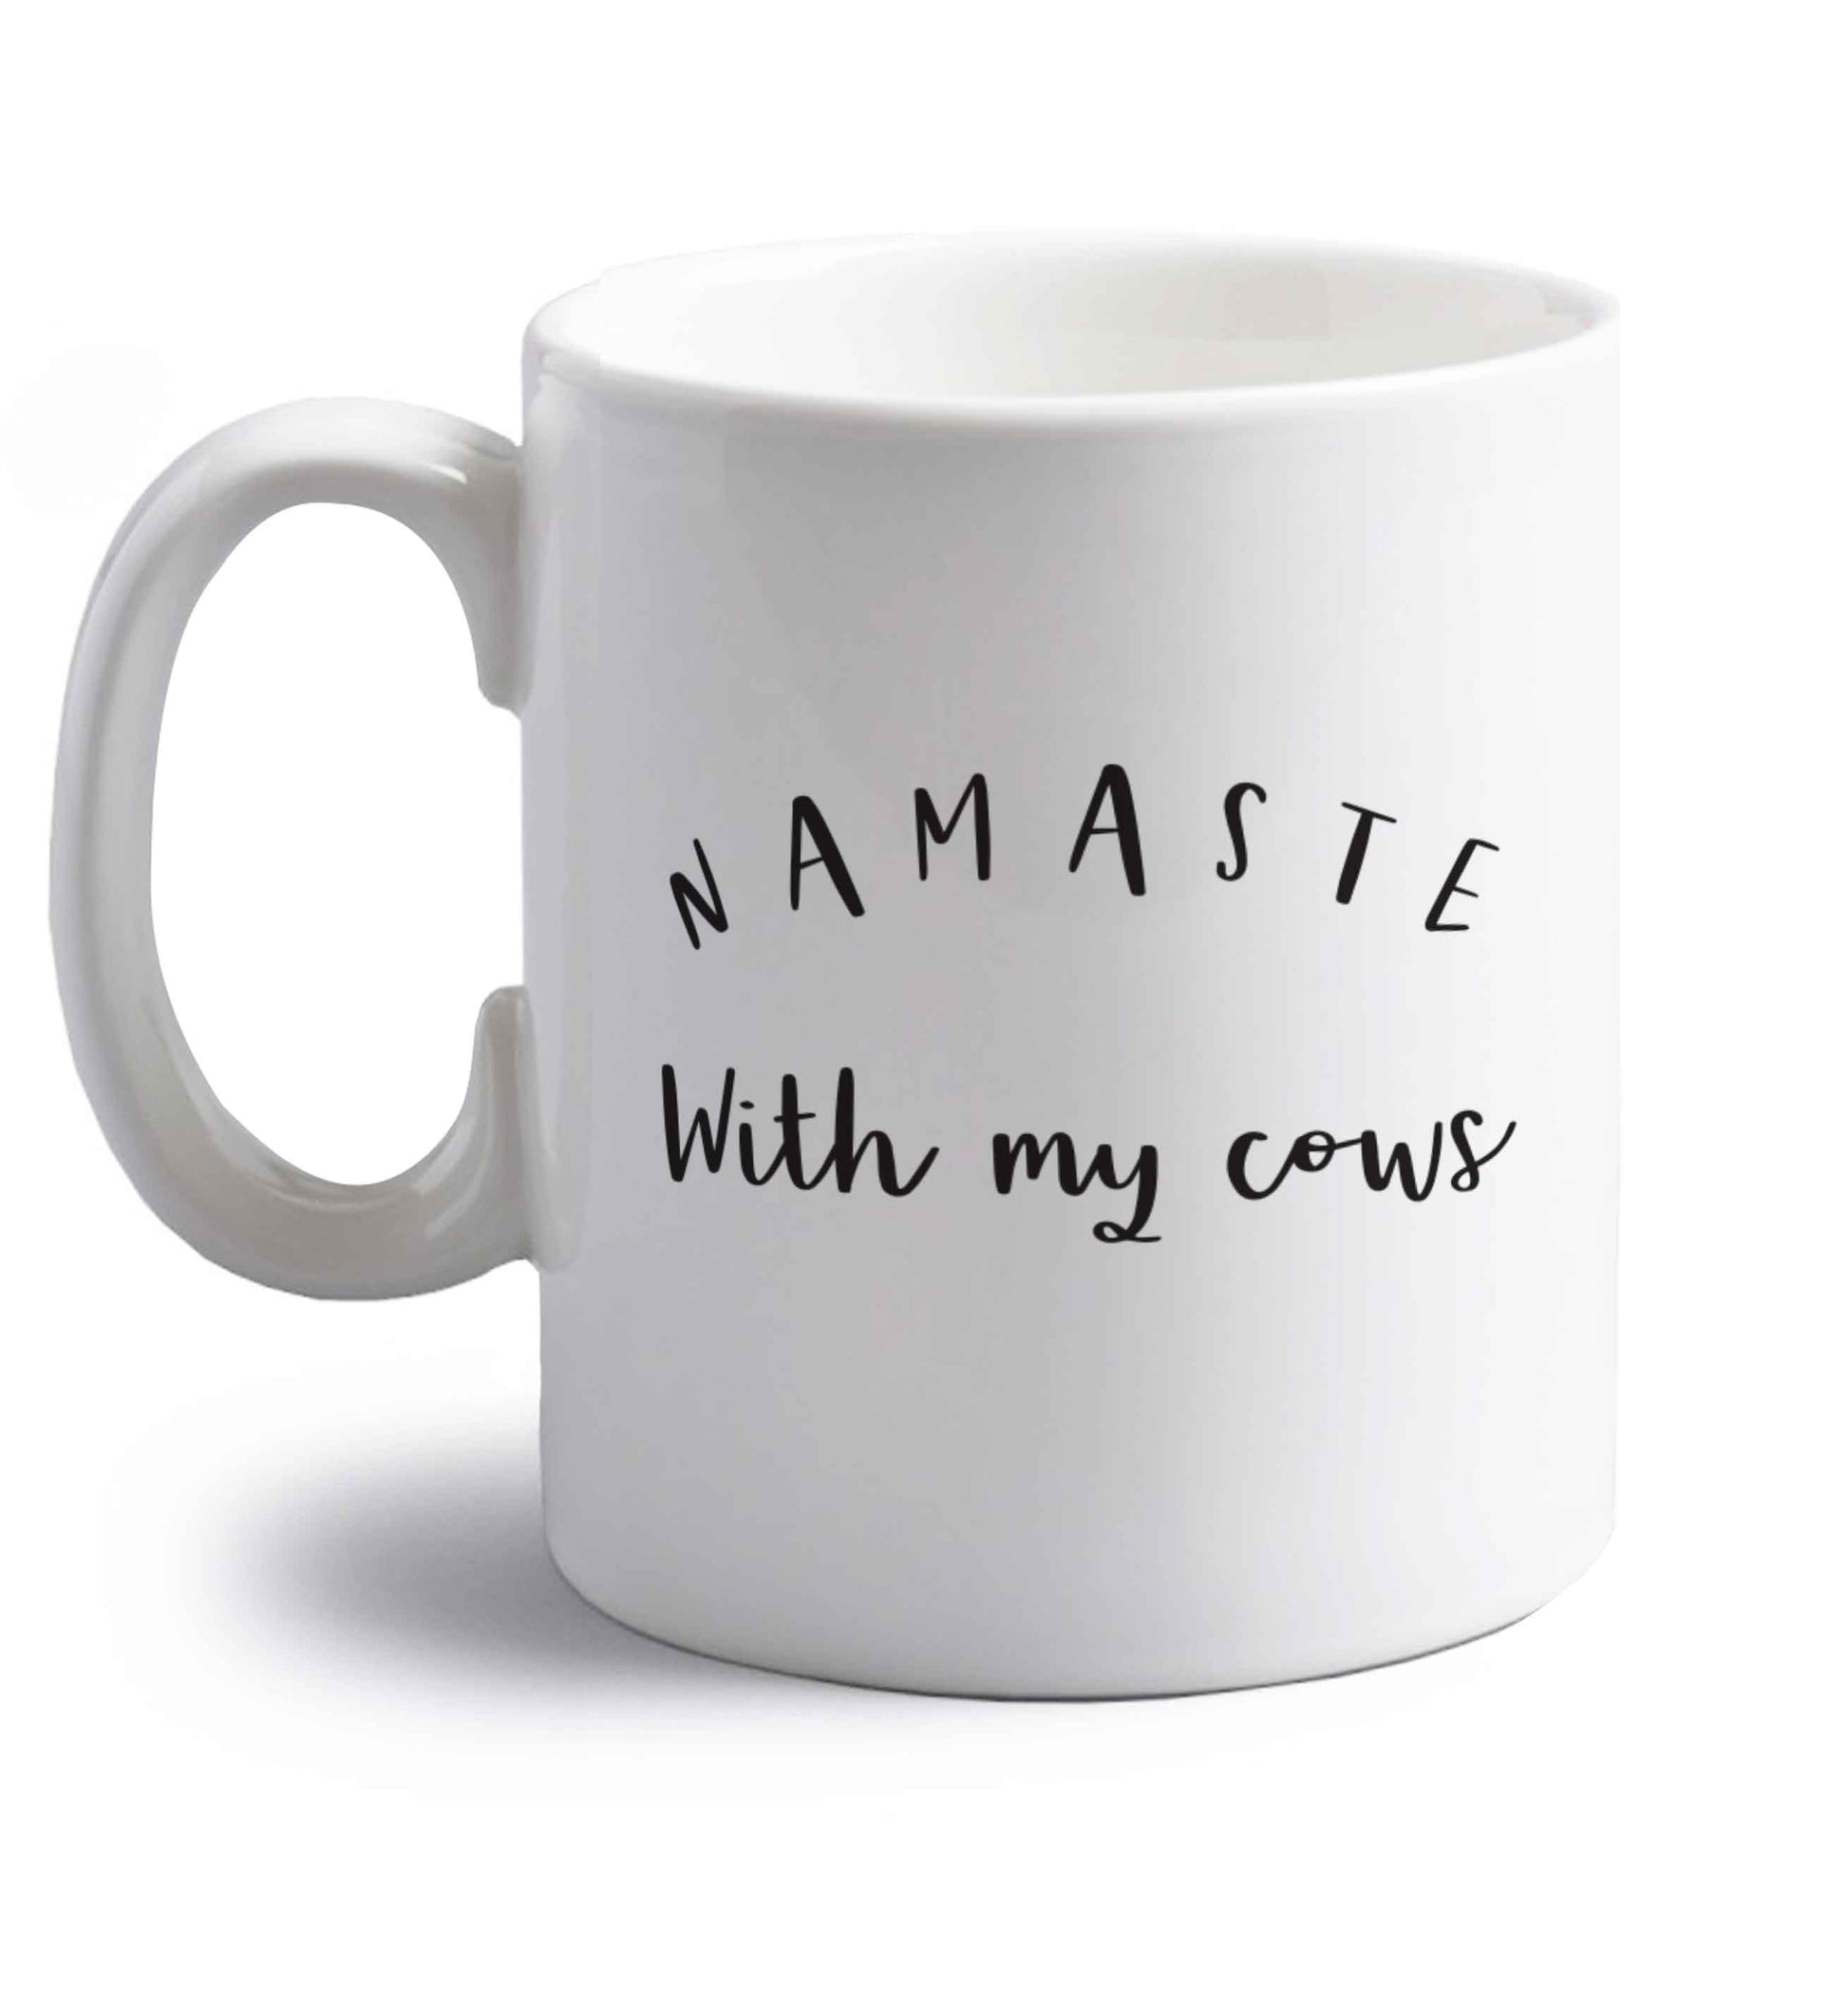 Namaste with my cows right handed white ceramic mug 